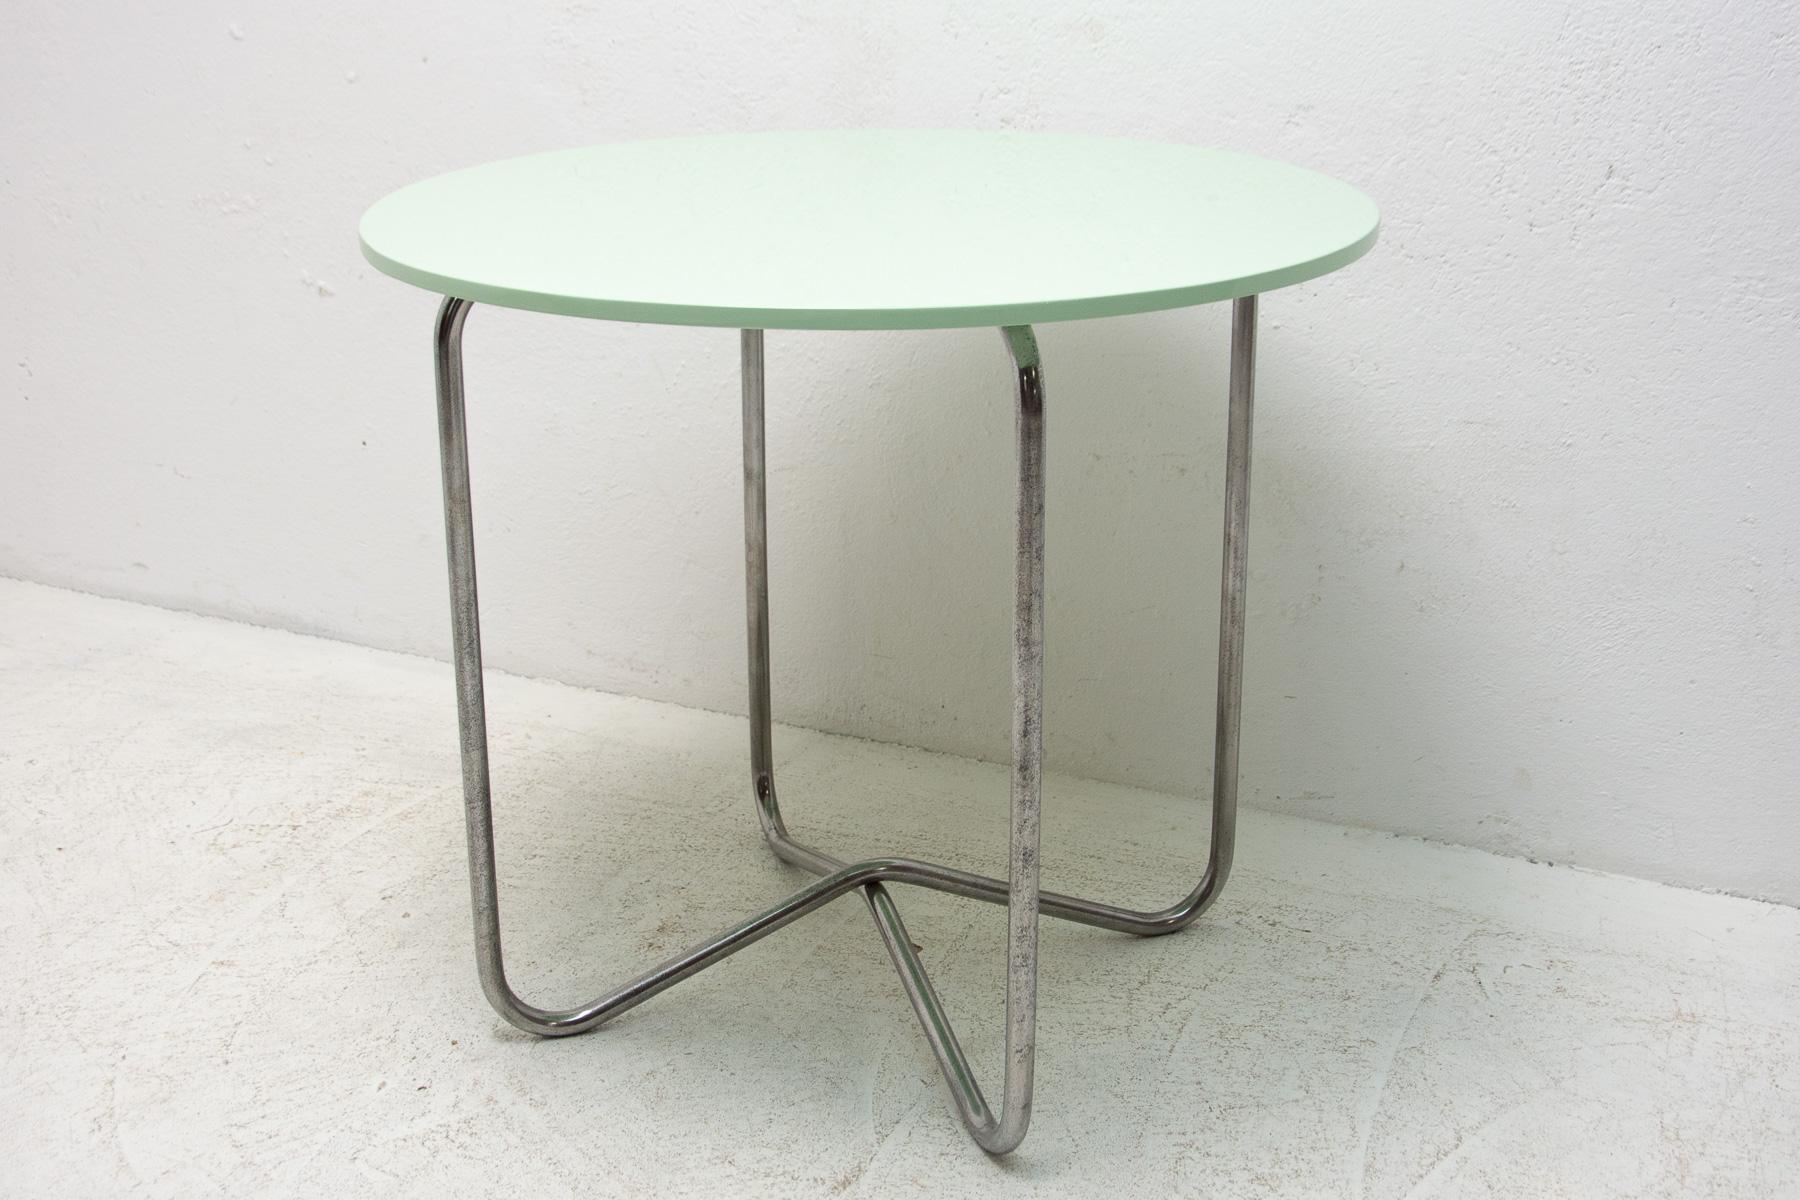 This coffee table was designed by Hynek Gottwald and made in the former Czechoslovakia in the 1930´s.

Fully renovated, the chromed part was cleaned and rubbed, the table top was painted to a high gloss with polyurethane in the original color hue.